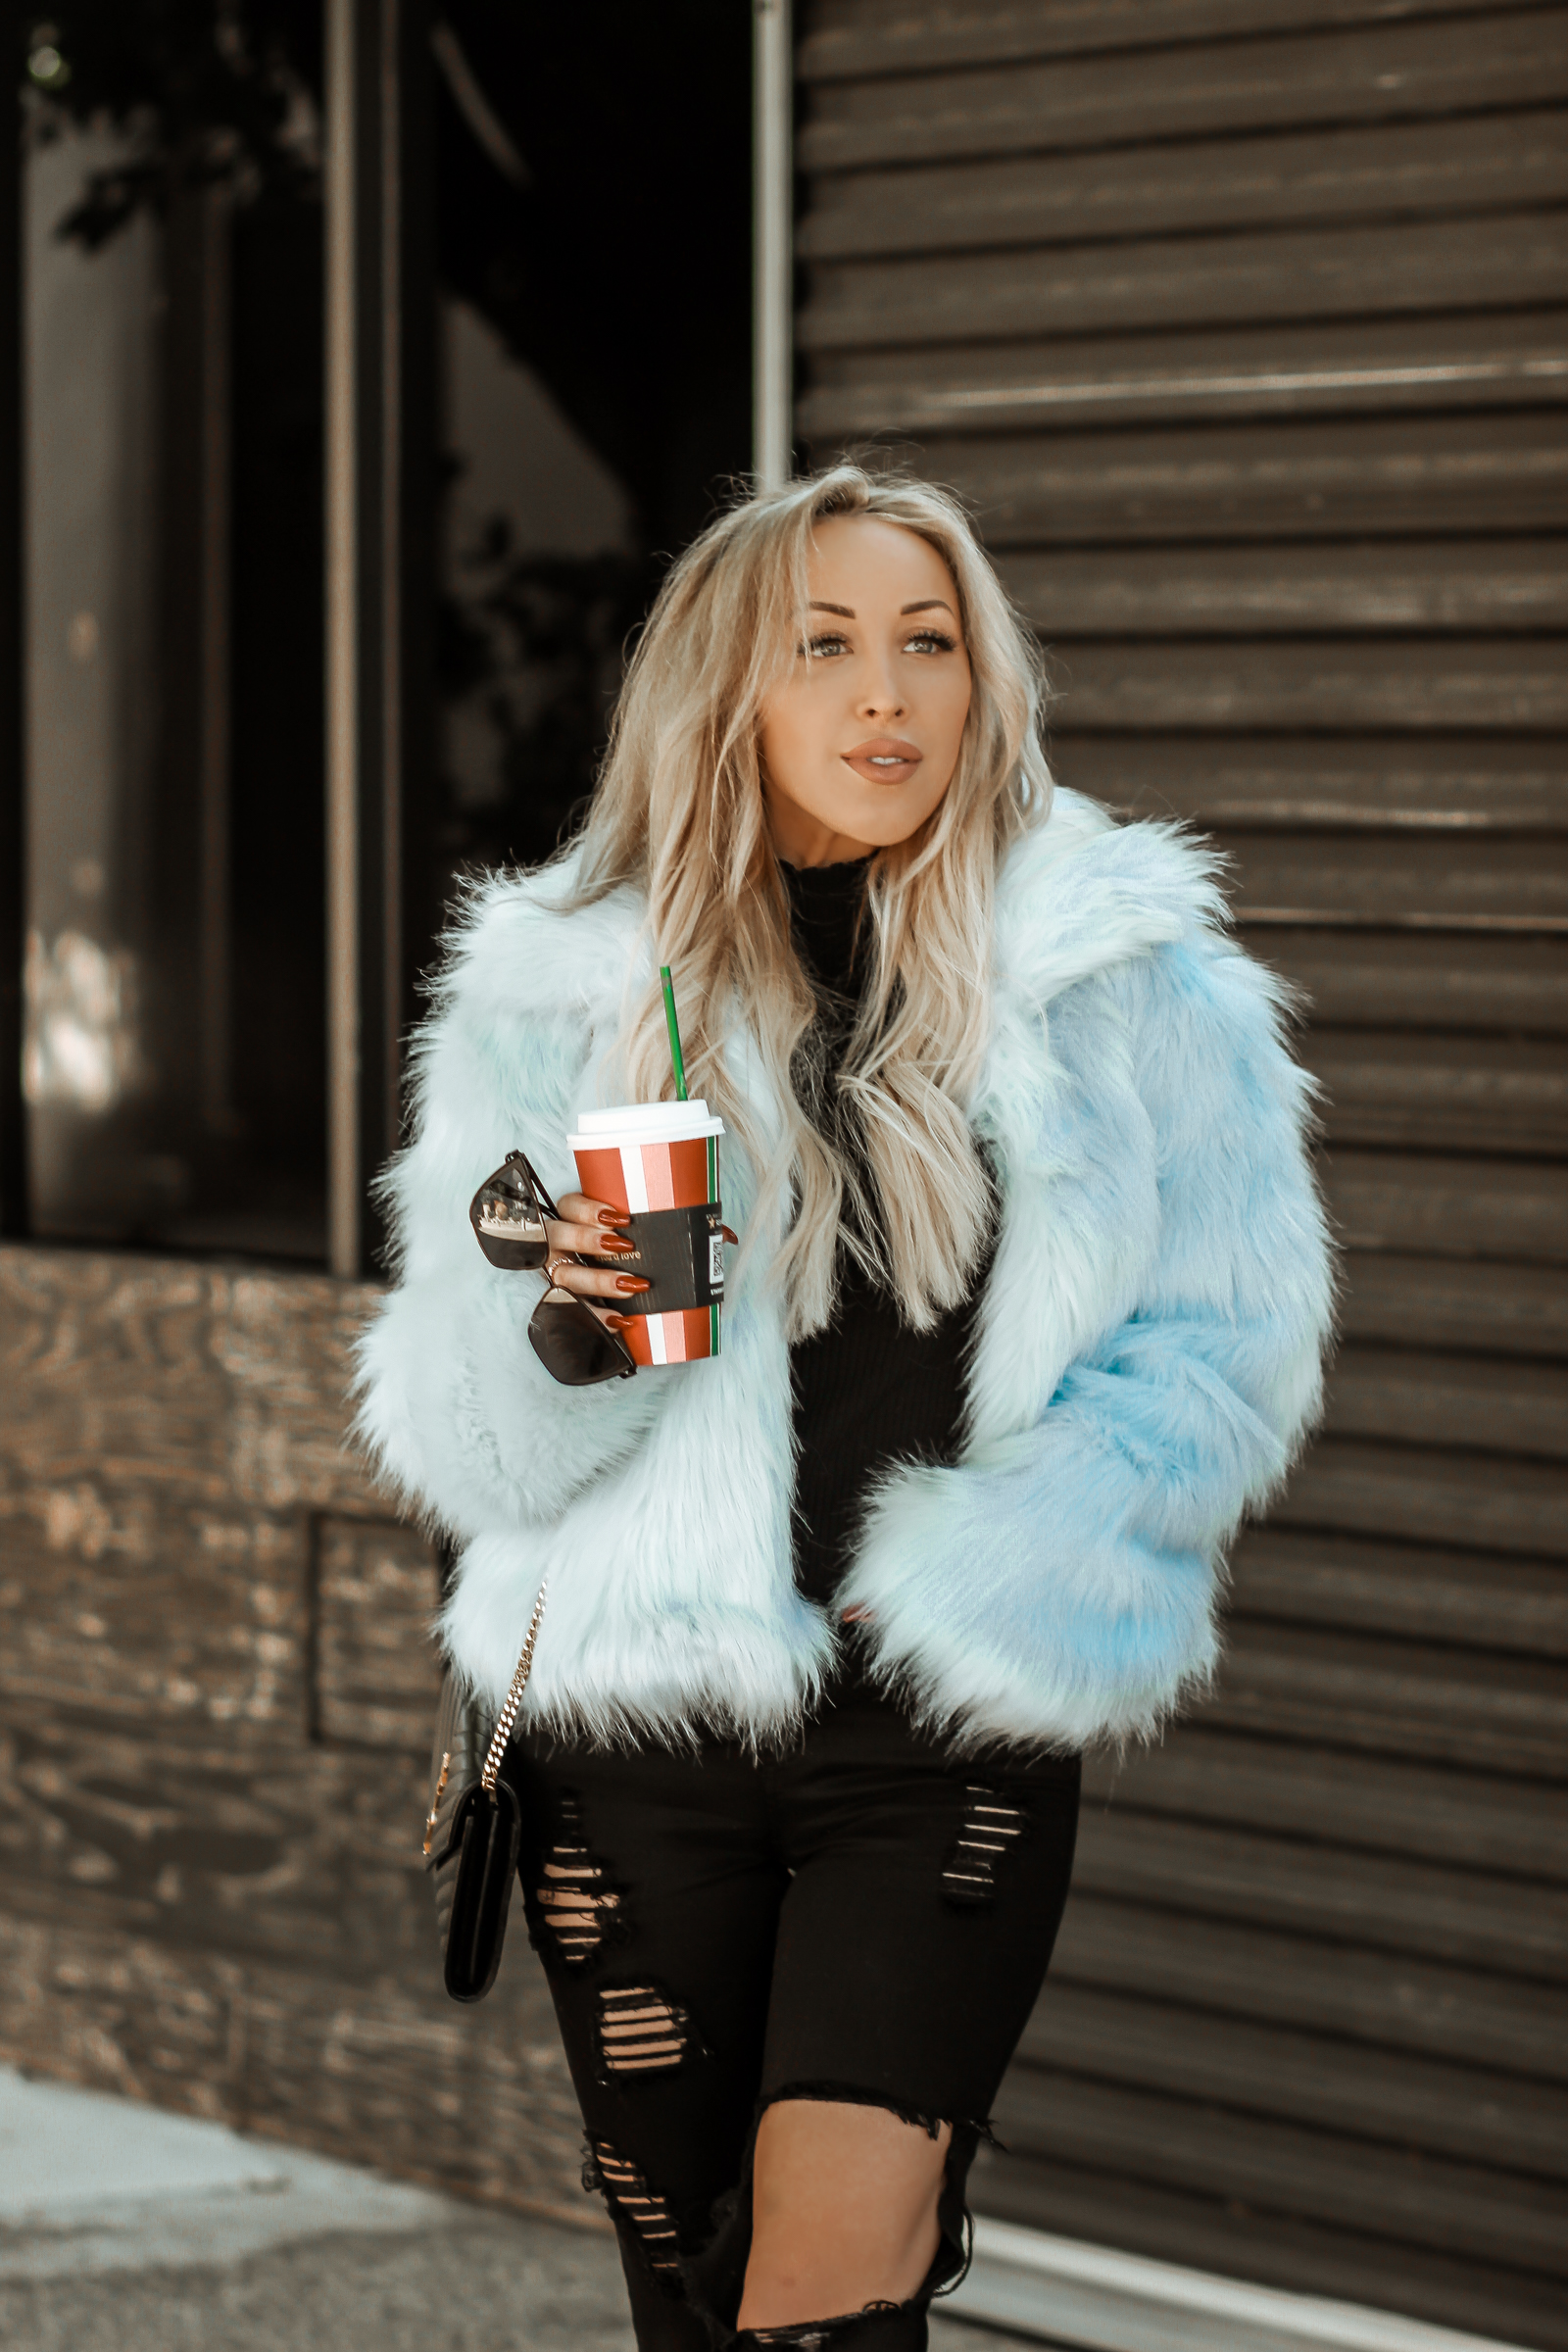 Light Blue Faux Fur Coat | Pastel Coat | Winter Fashion | Fall Fashion | Long Blonde Hair | Hair Extensions | Blondie in the City by Hayley Larue